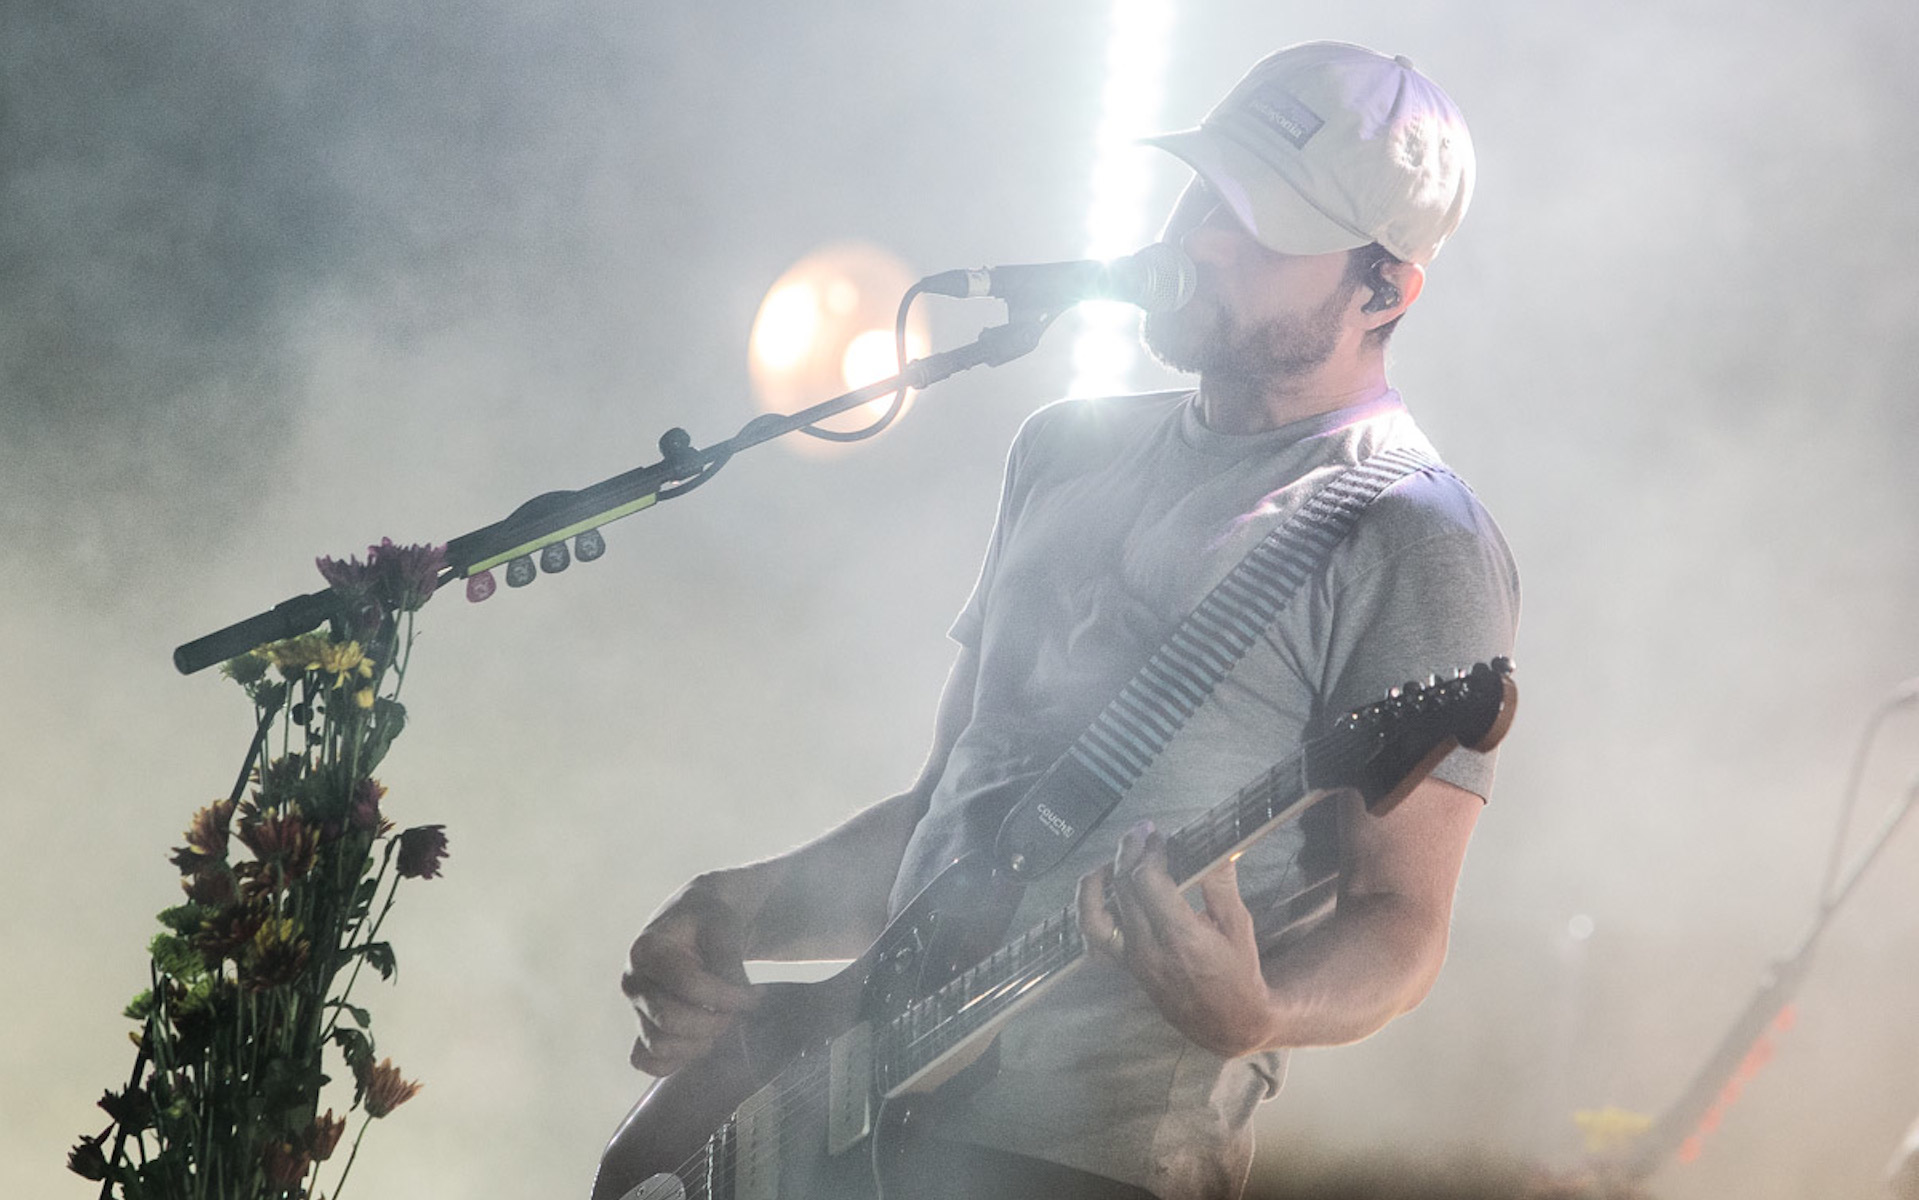 Live Review + Photo Gallery: Brand New remain full of surprises at The Wang  - Vanyaland